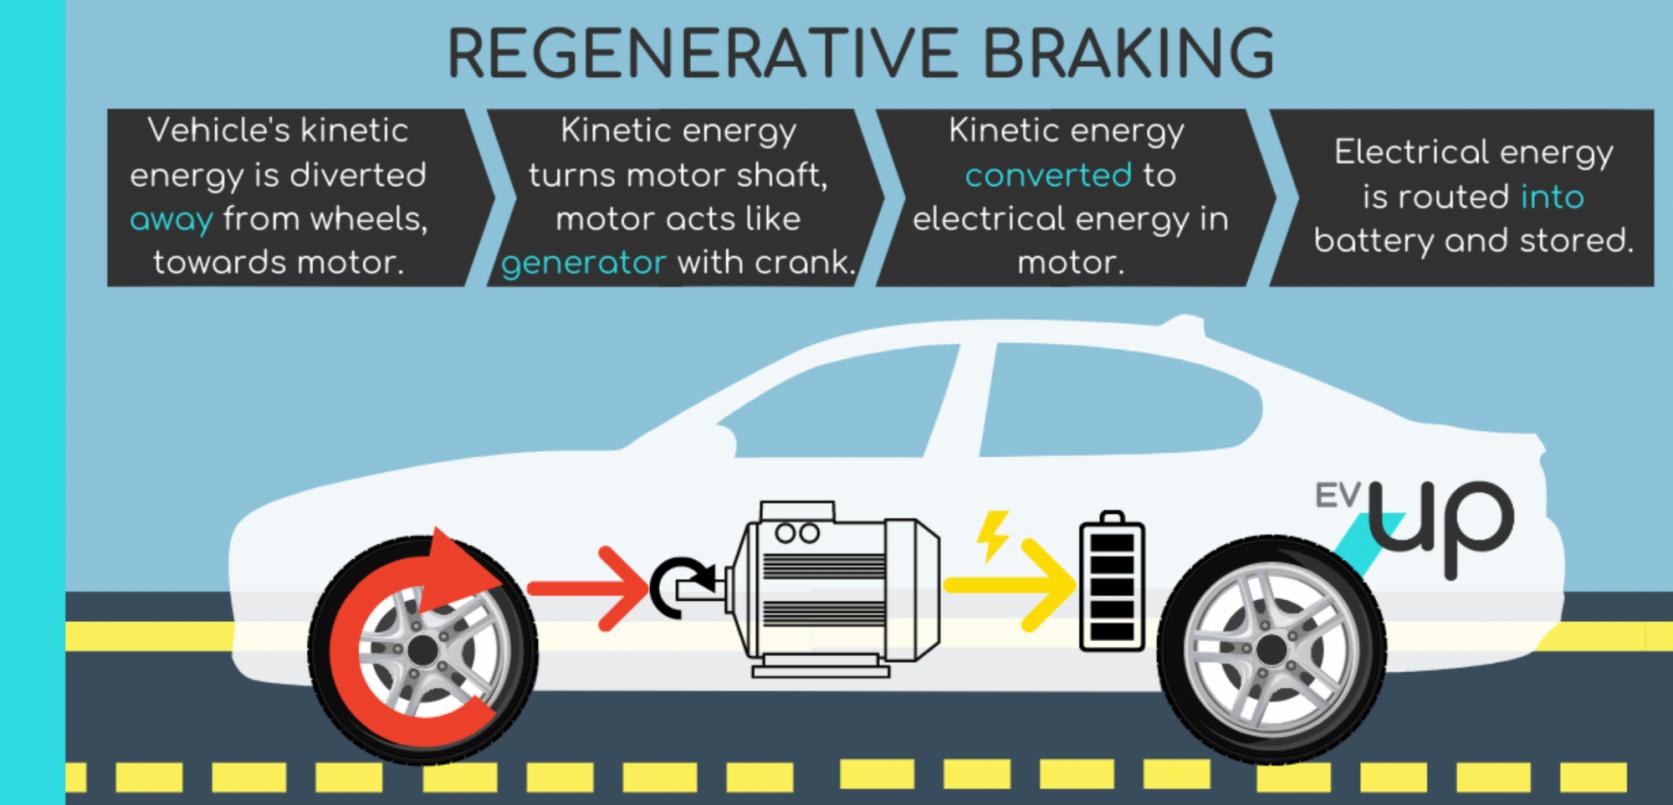 How does regenerative braking work in an electric vehicle? EVUp